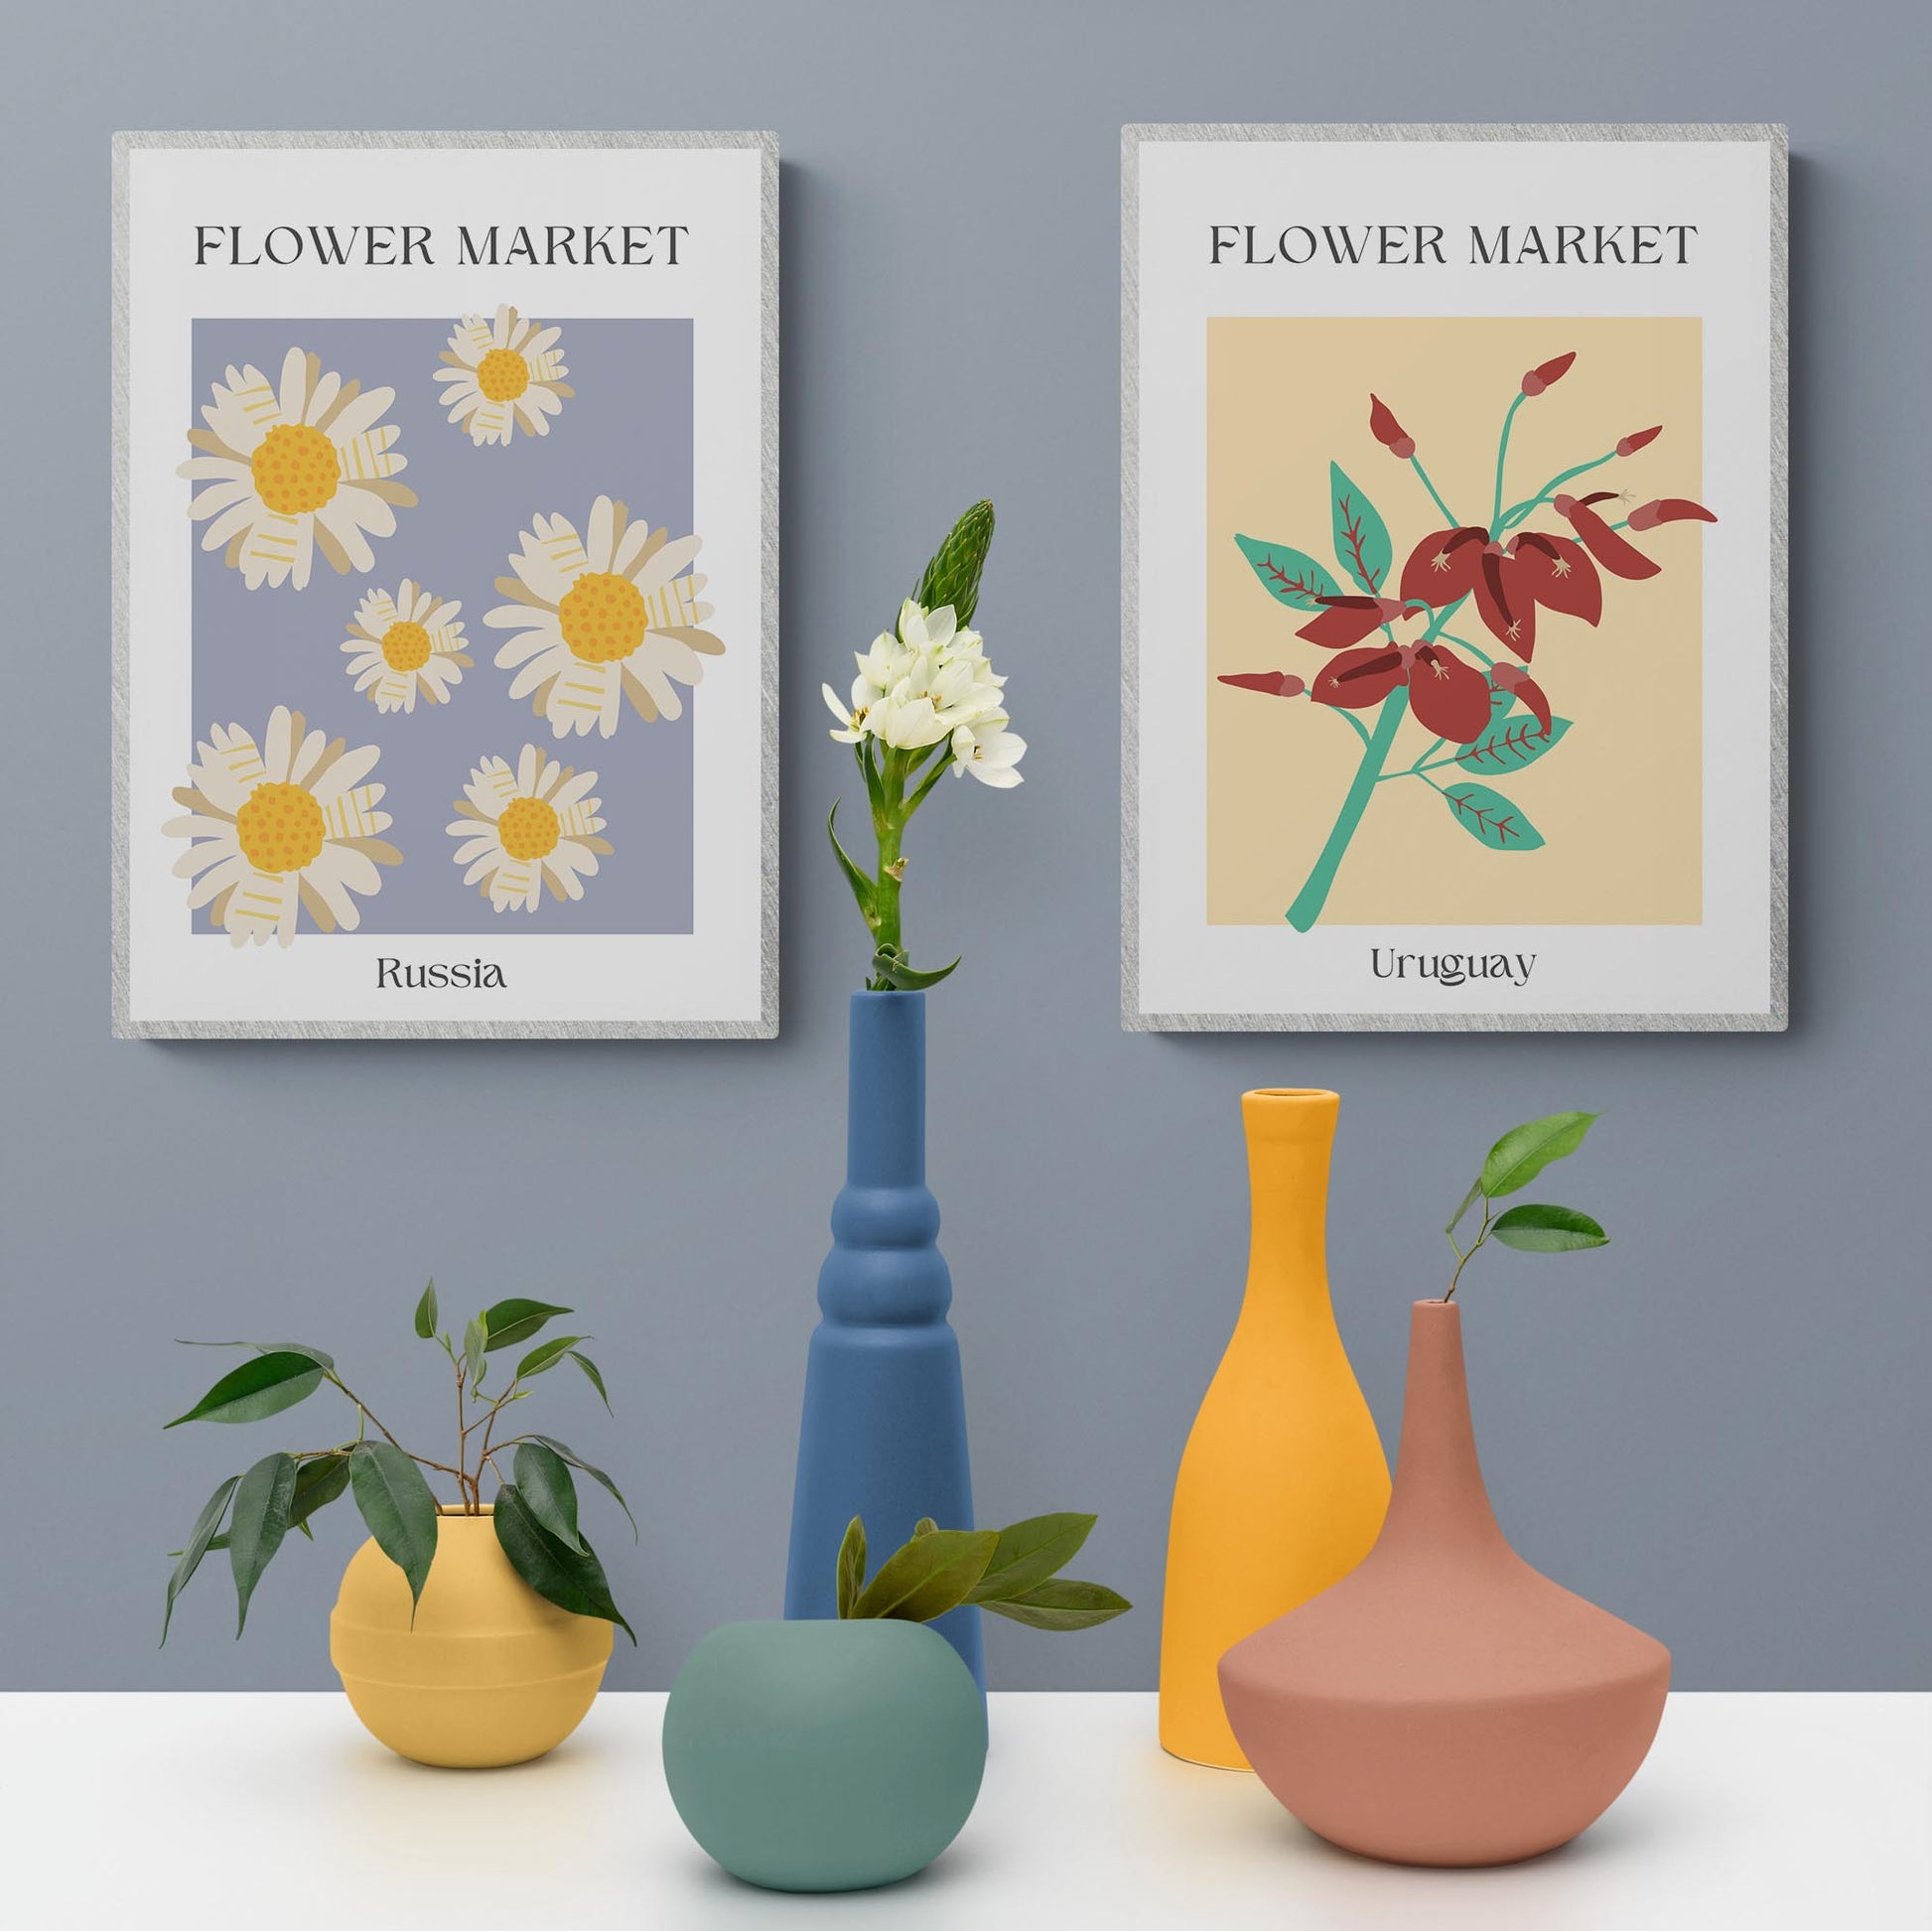 Inspired by the Irish flower market, this wall art print infuses your space with a burst of color and an artistic, modern aesthetic. Featuring an alluring mix of shapes, formes, and pastel hues, this poster art offers an eye-catching gallery-worthy display. Create an inspiring atmosphere in any room with this floral drawing poster.